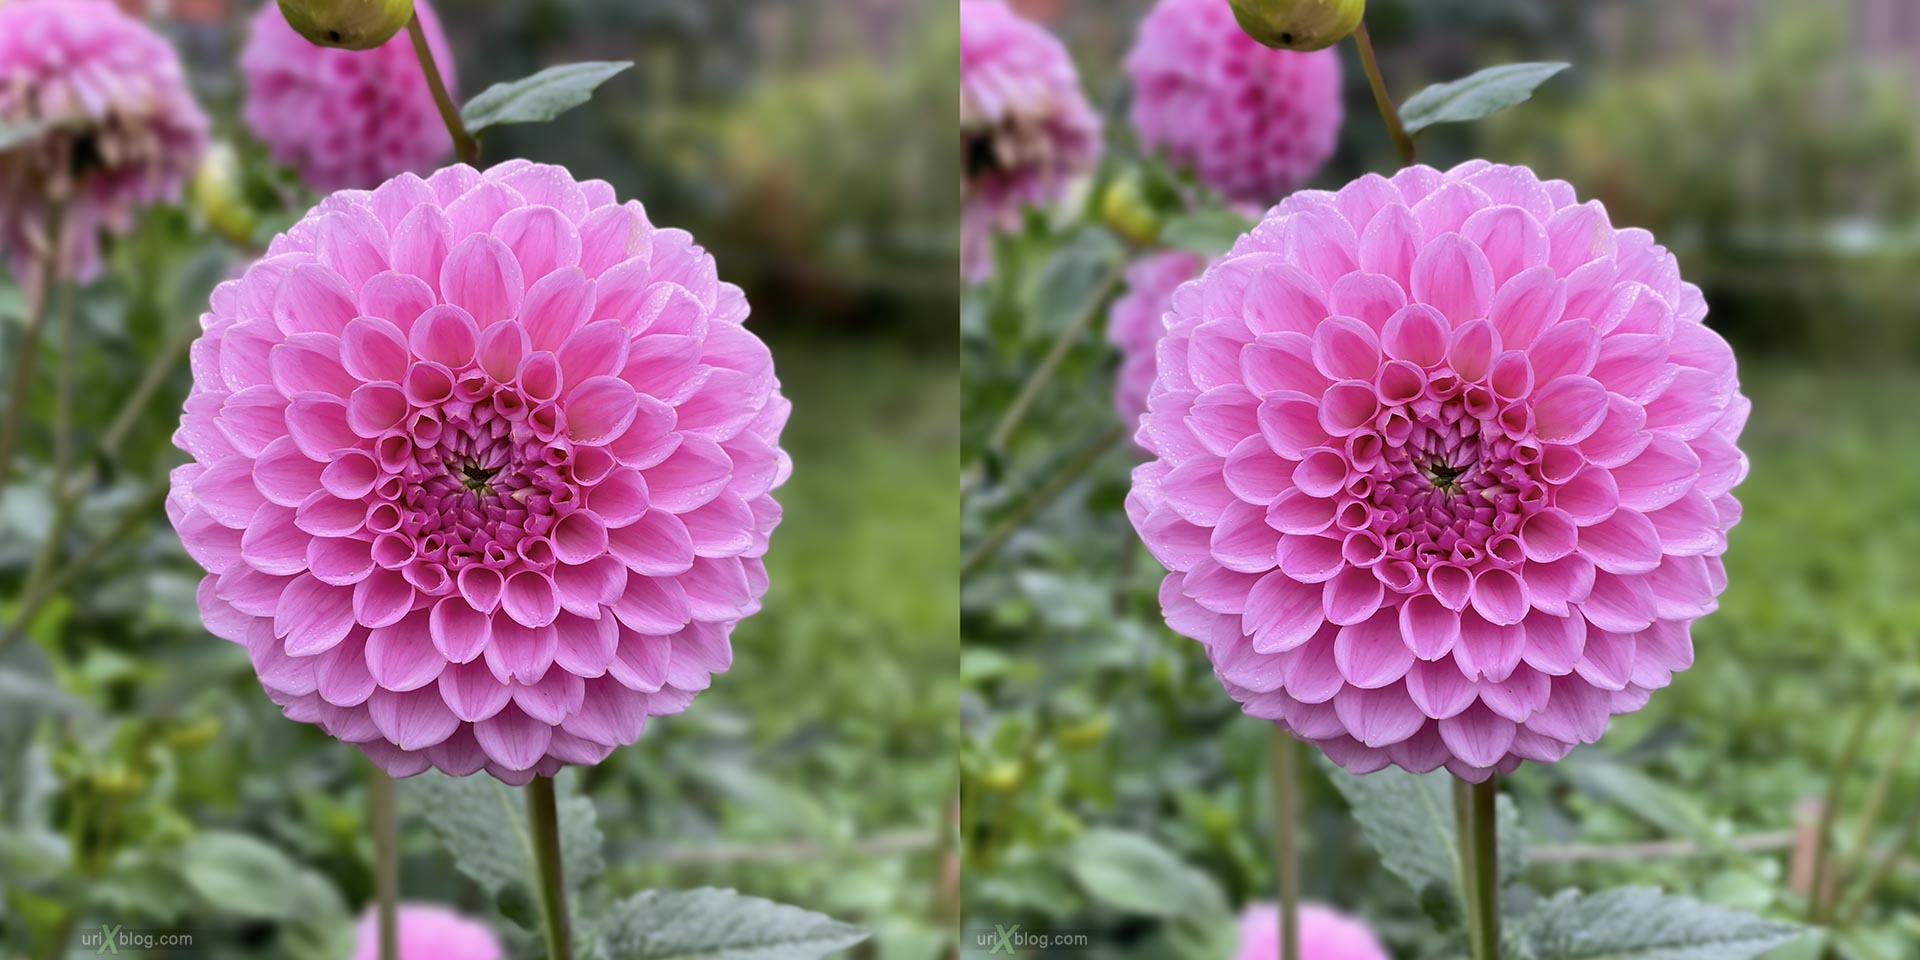 flower, bud, flowers, Apothecary garden, botanical garden, Moscow, Russia, 3D, stereo pair, cross-eyed, crossview, cross view stereo pair, stereoscopic